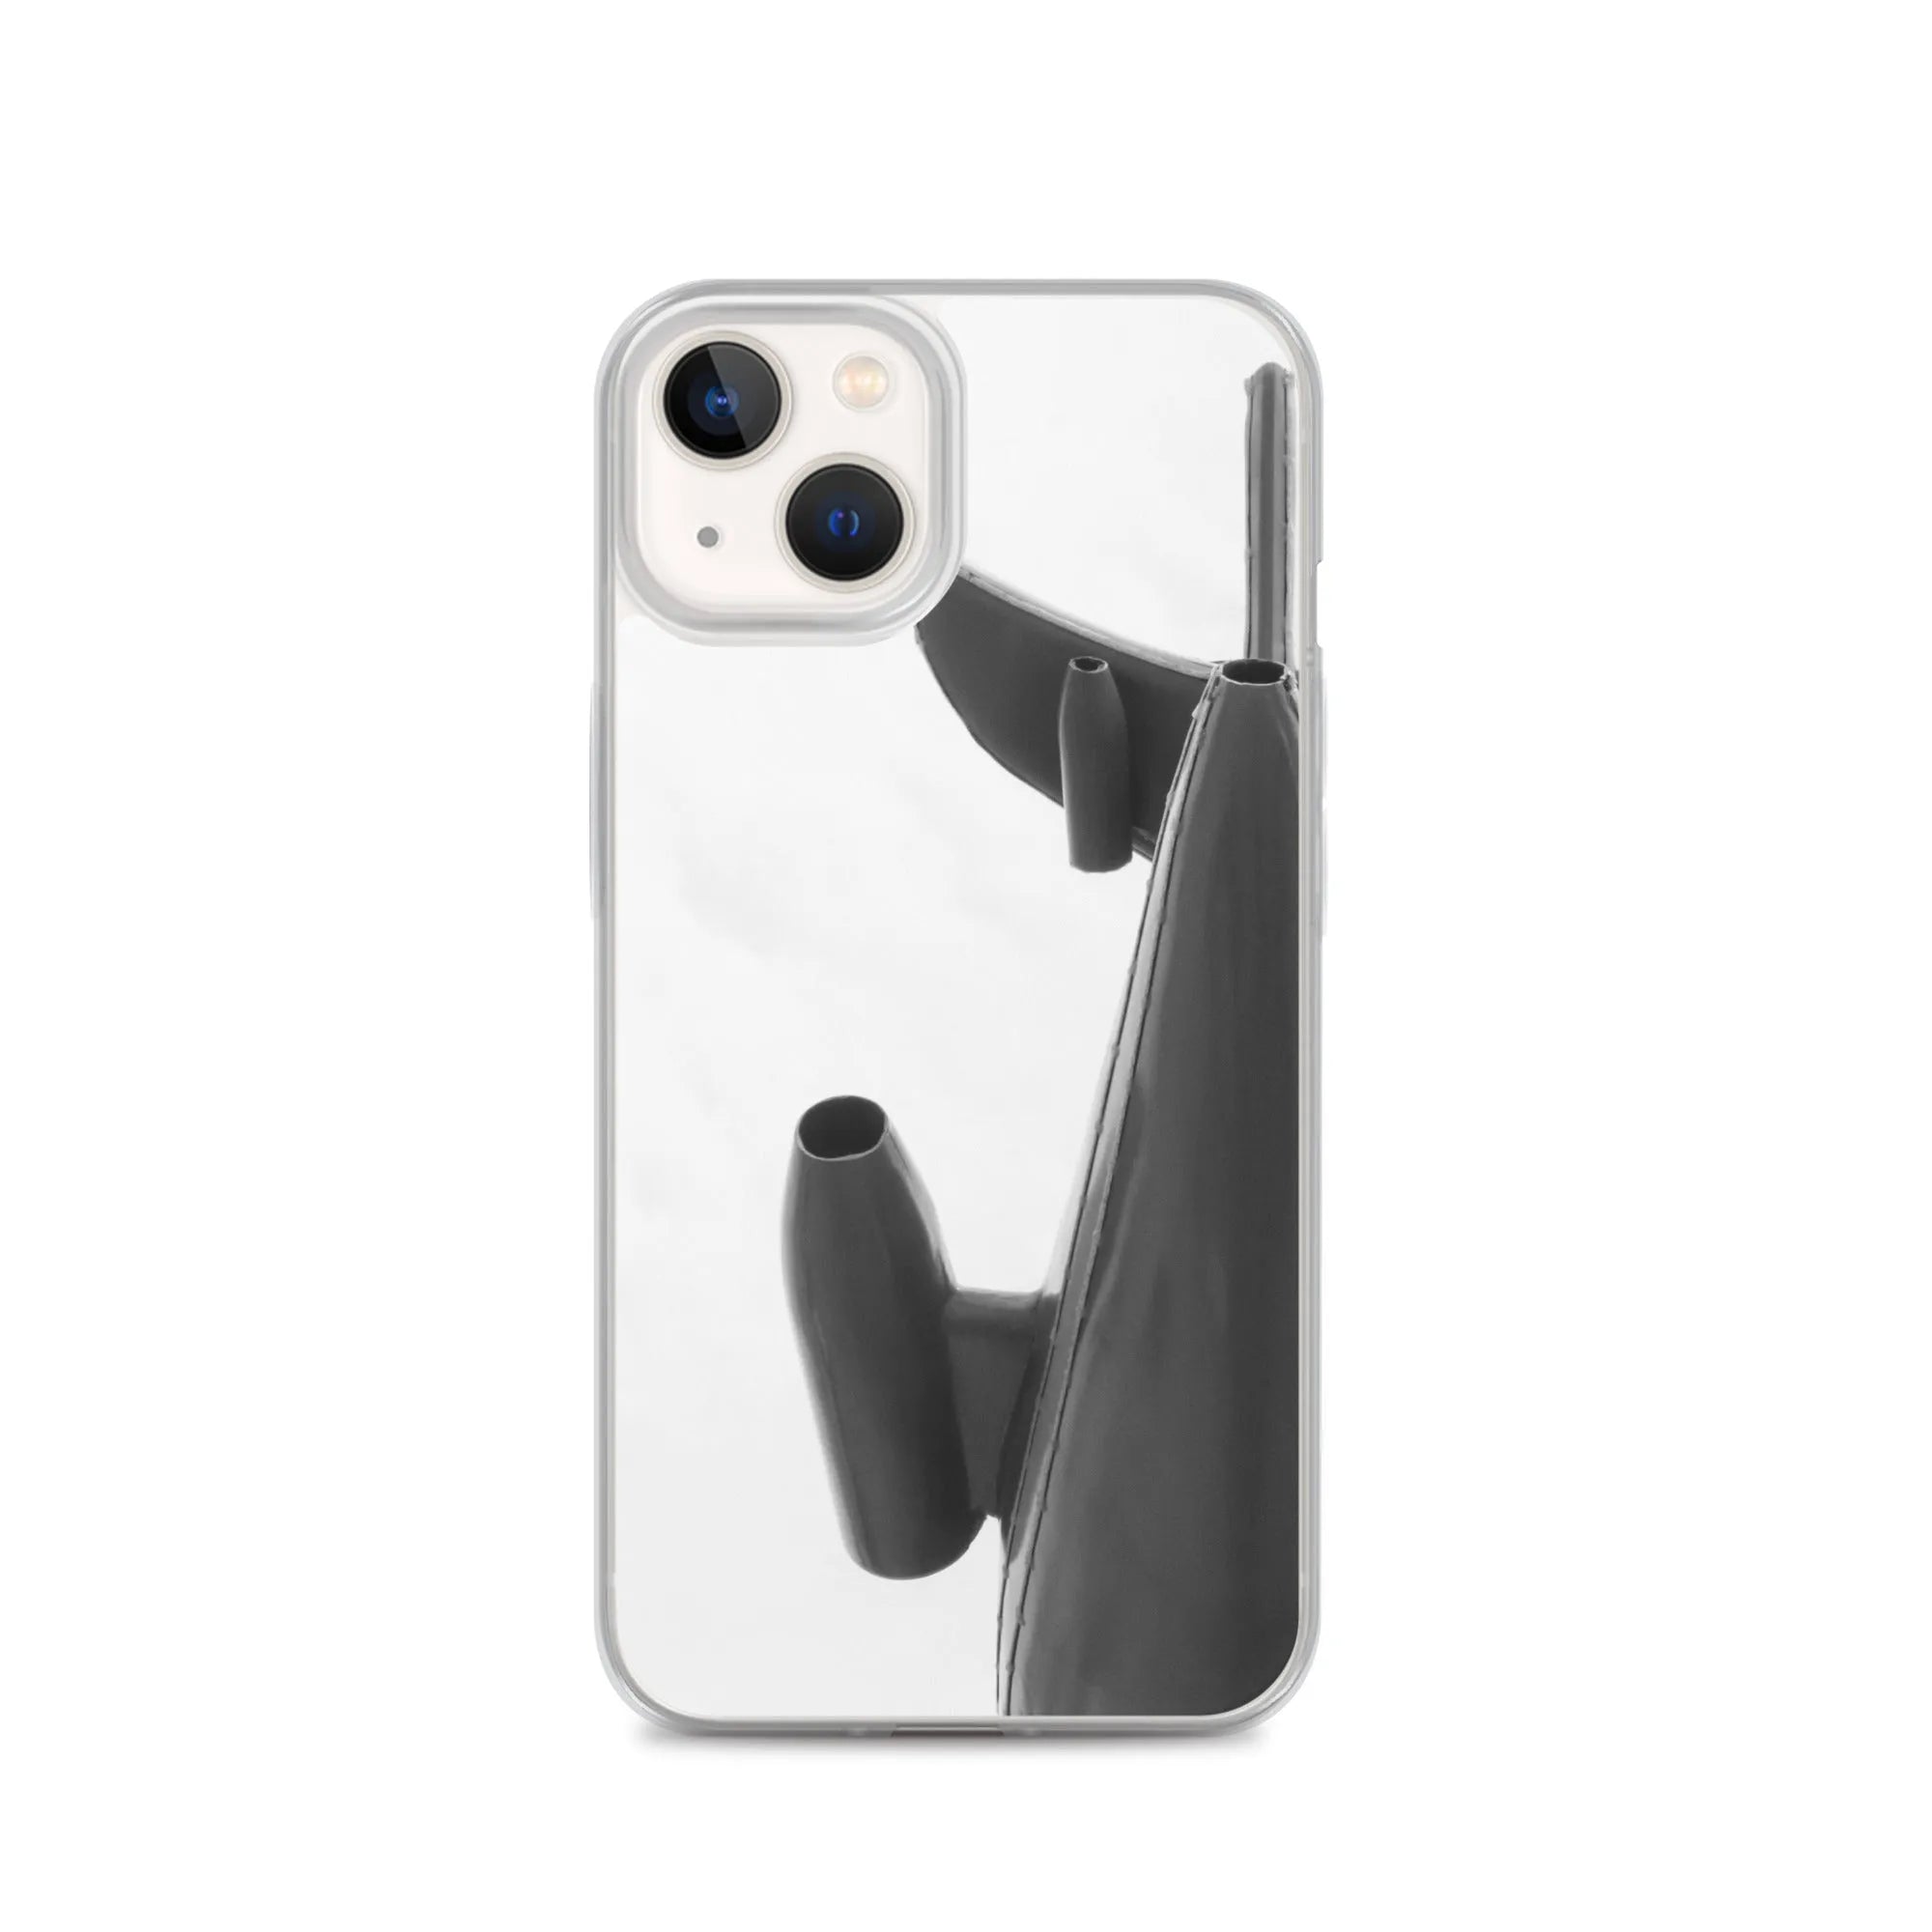 Look Up Iphone Case - Black And White - Iphone 13 - Mobile Phone Cases - Aesthetic Art